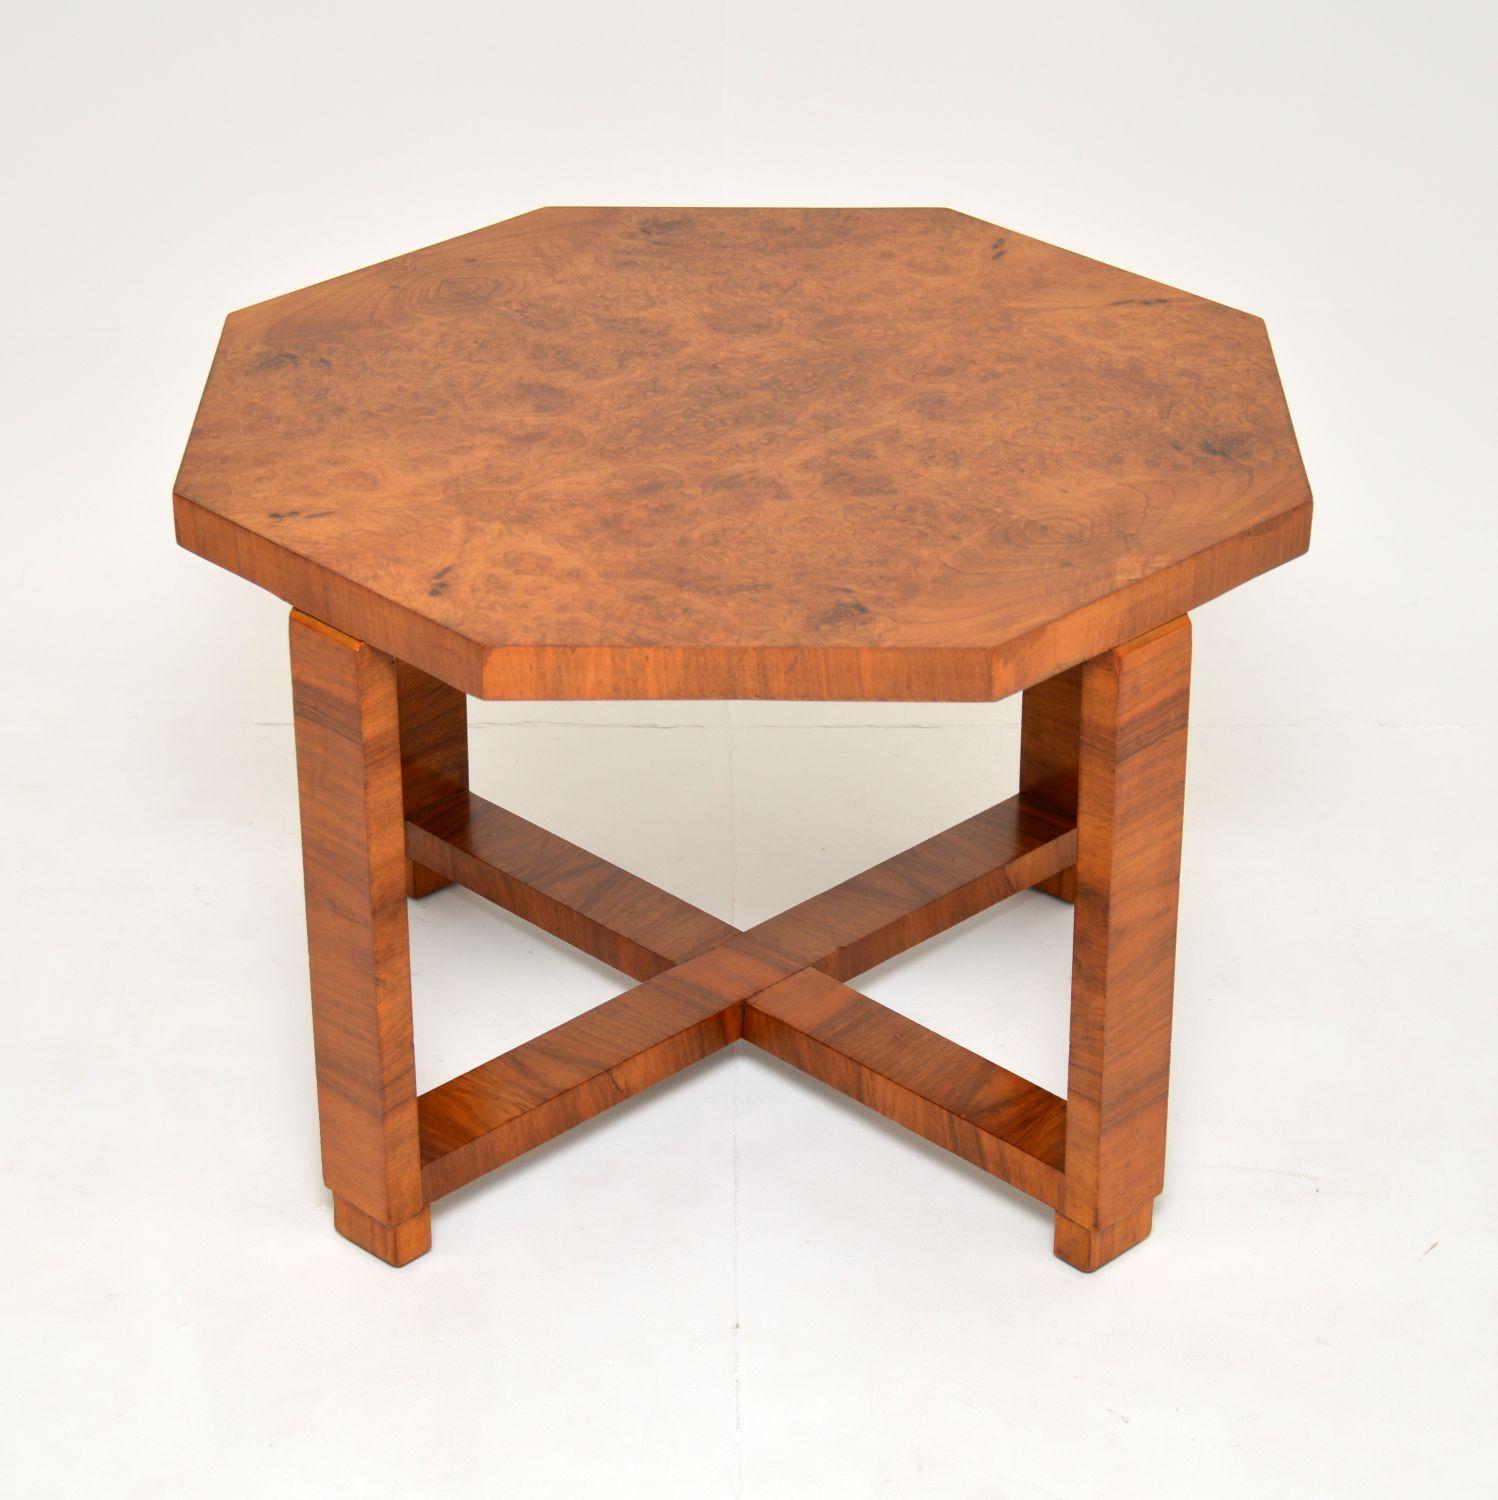 A stunning original Art Deco period octagonal coffee table. This was made in England, it dates from the 1930’s.

The quality is amazing, this is a very impressive item and is a great size. The top has very thick edges and beautiful burr walnut